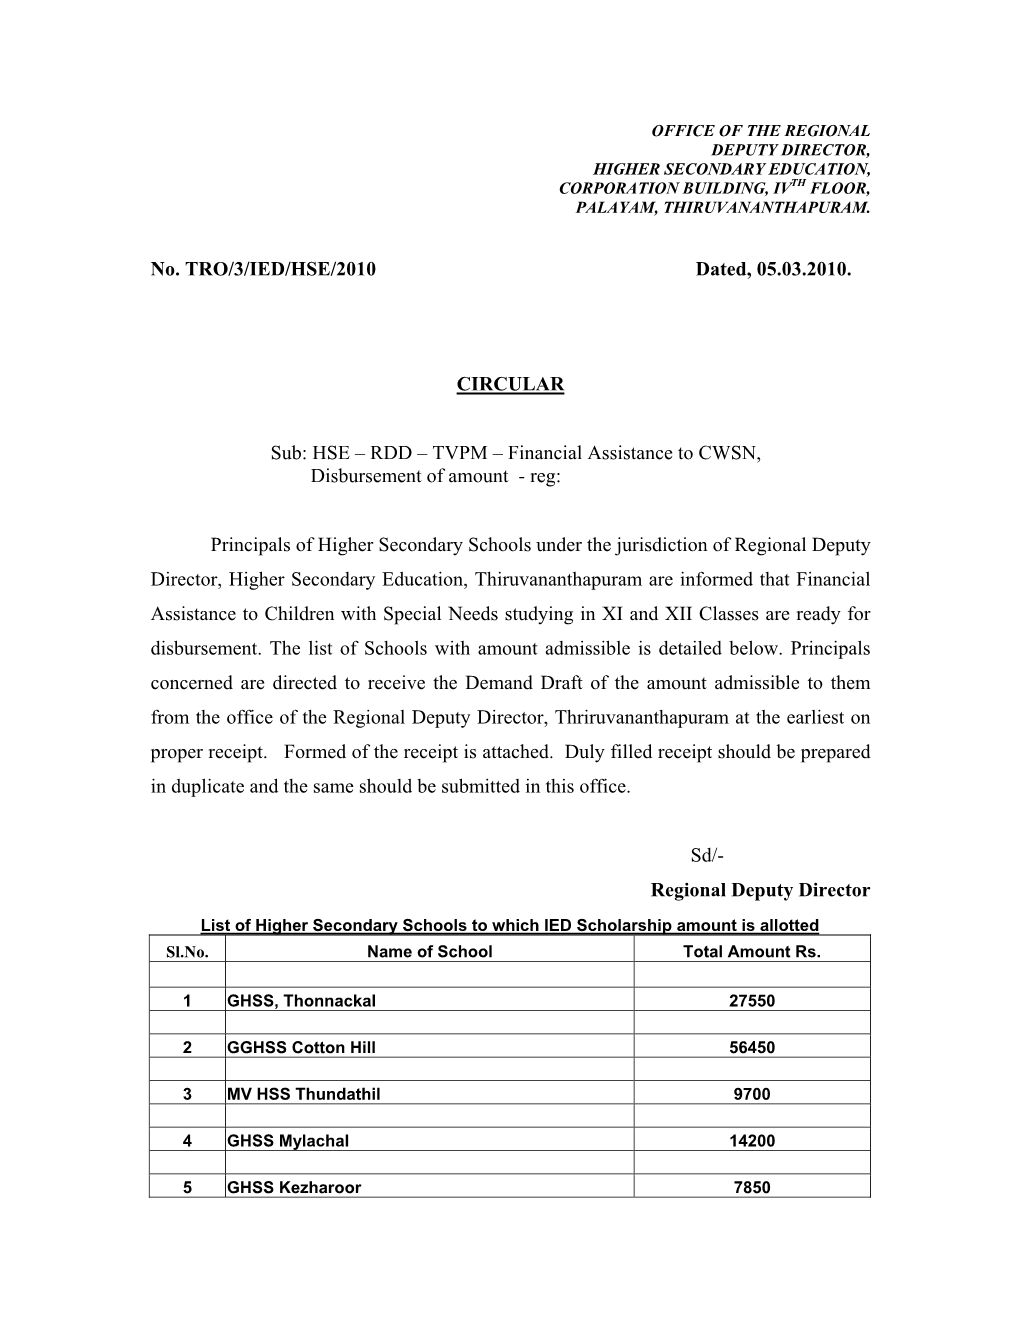 No. TRO/3/IED/HSE/2010 Dated, 05.03.2010. CIRCULAR Sub: HSE – RDD – TVPM – Financial Assistance to CWSN, Disbursement